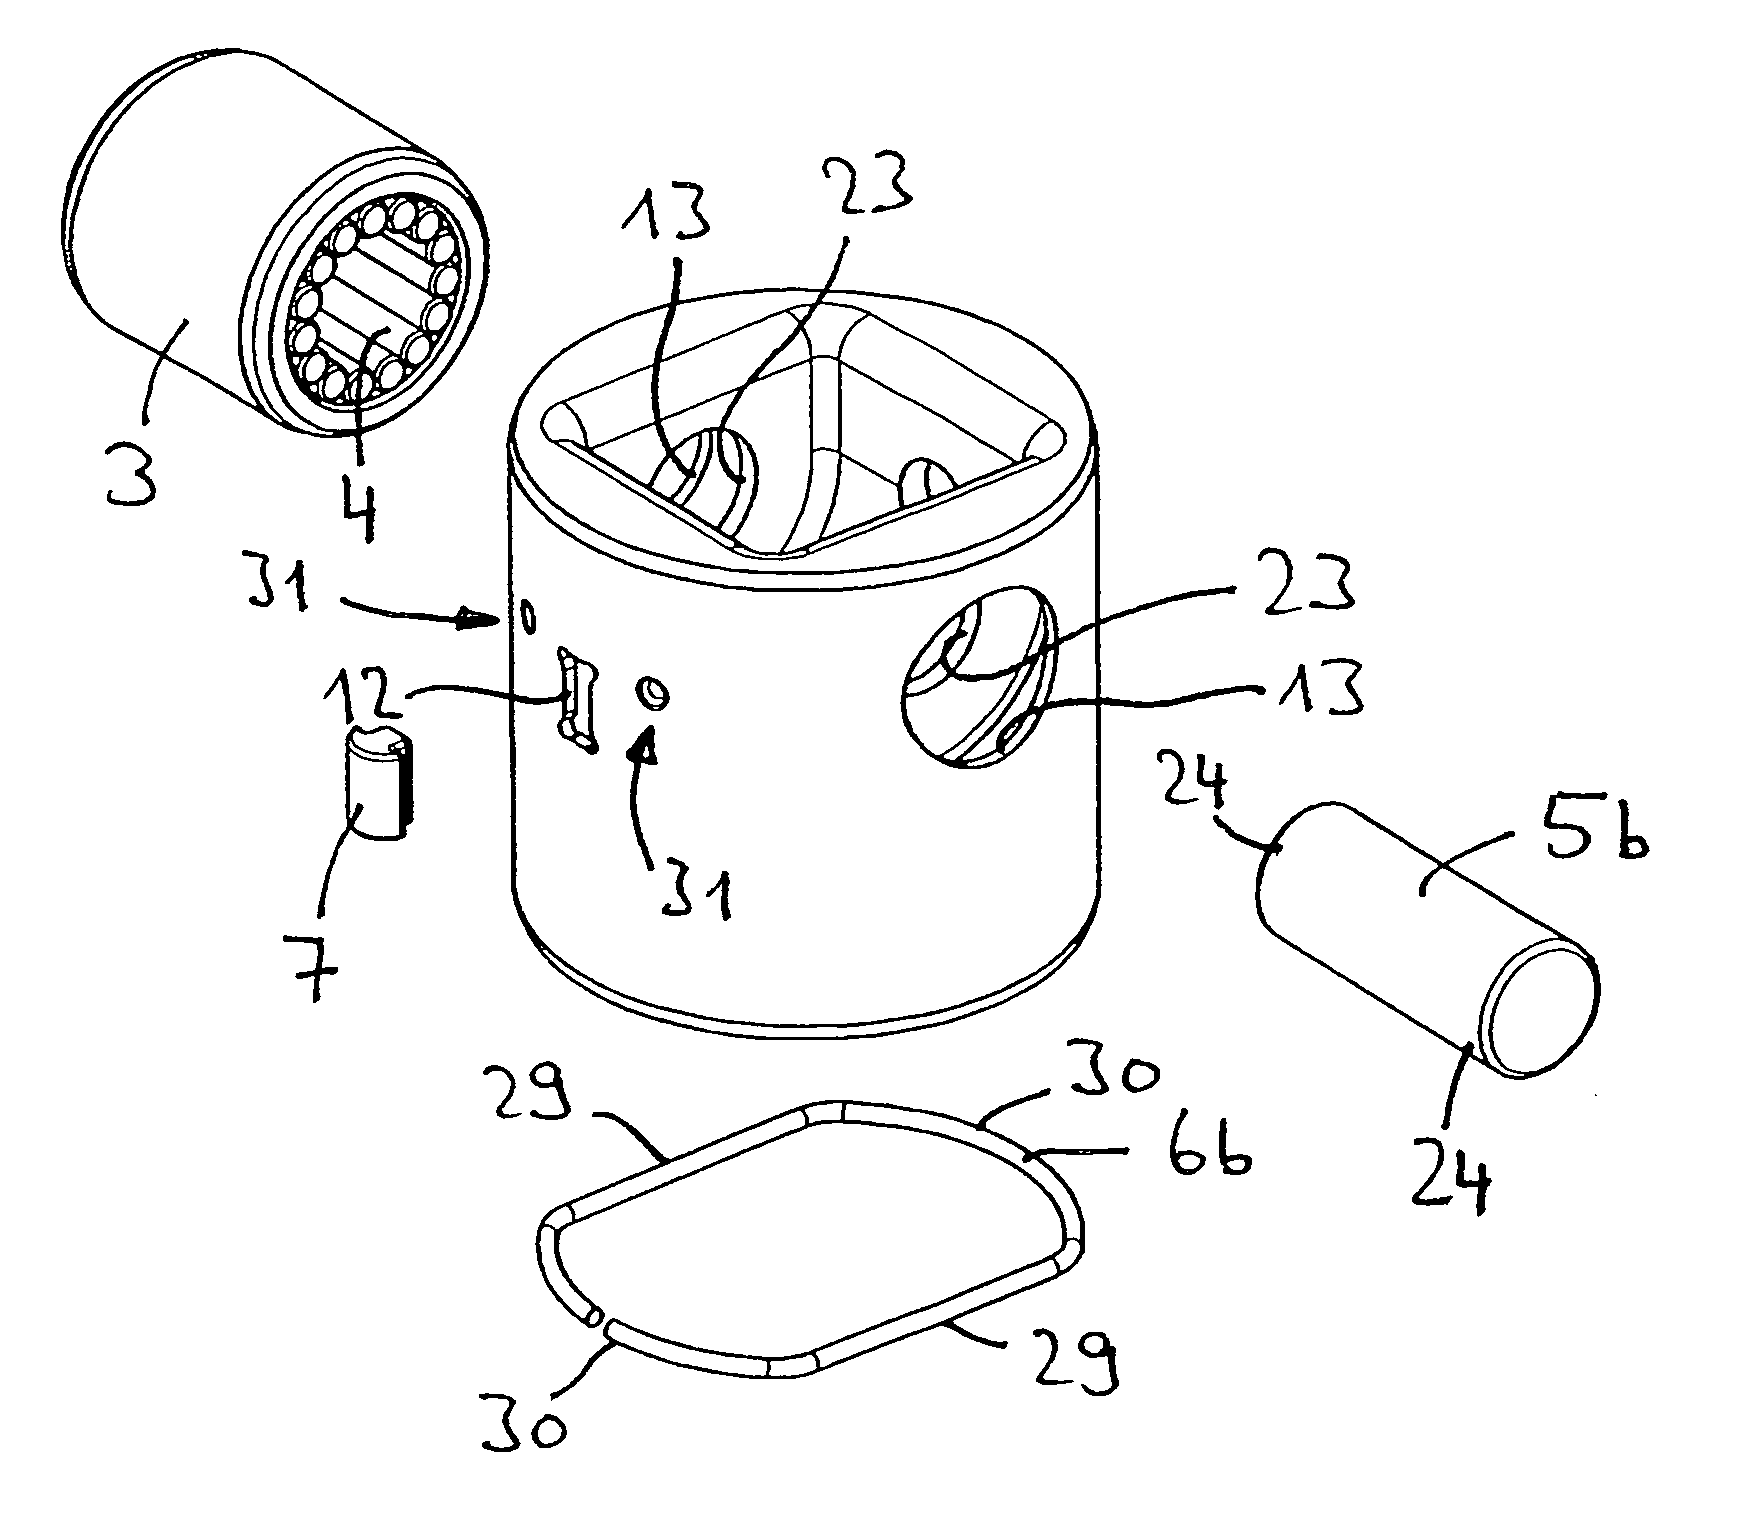 Mechanical roller tappet for an internal combustion engine